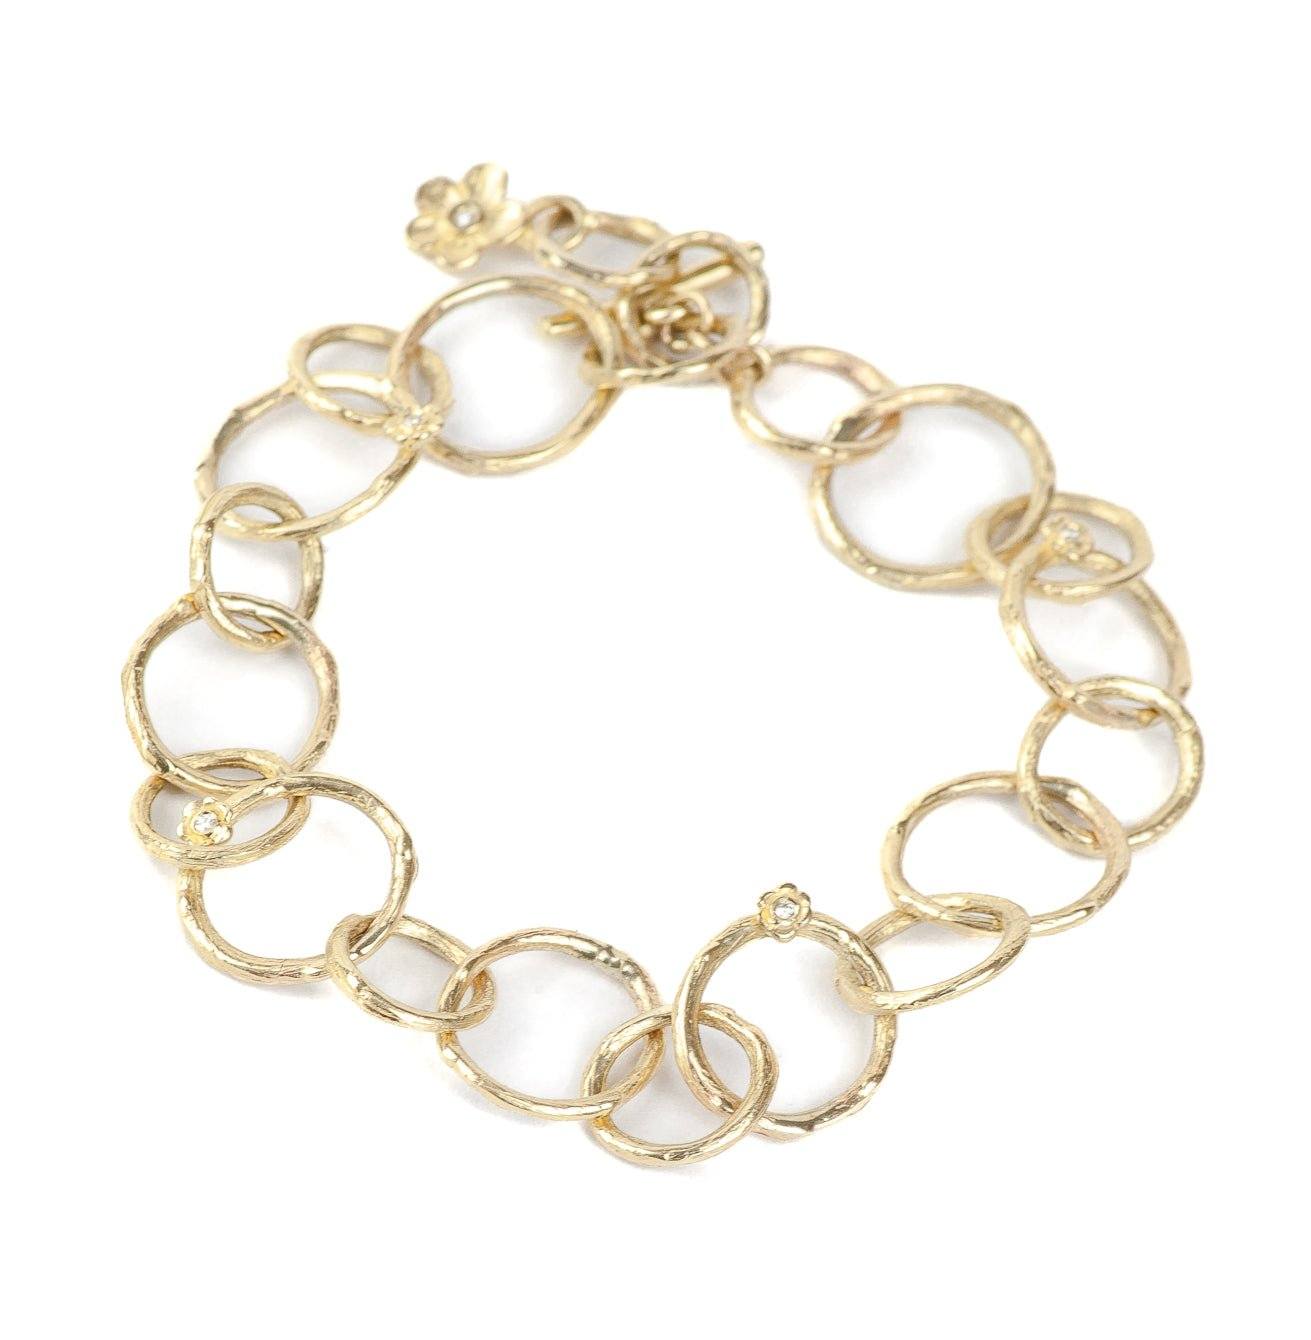 Gold Chain Link Bracelet with Diamond Flowers